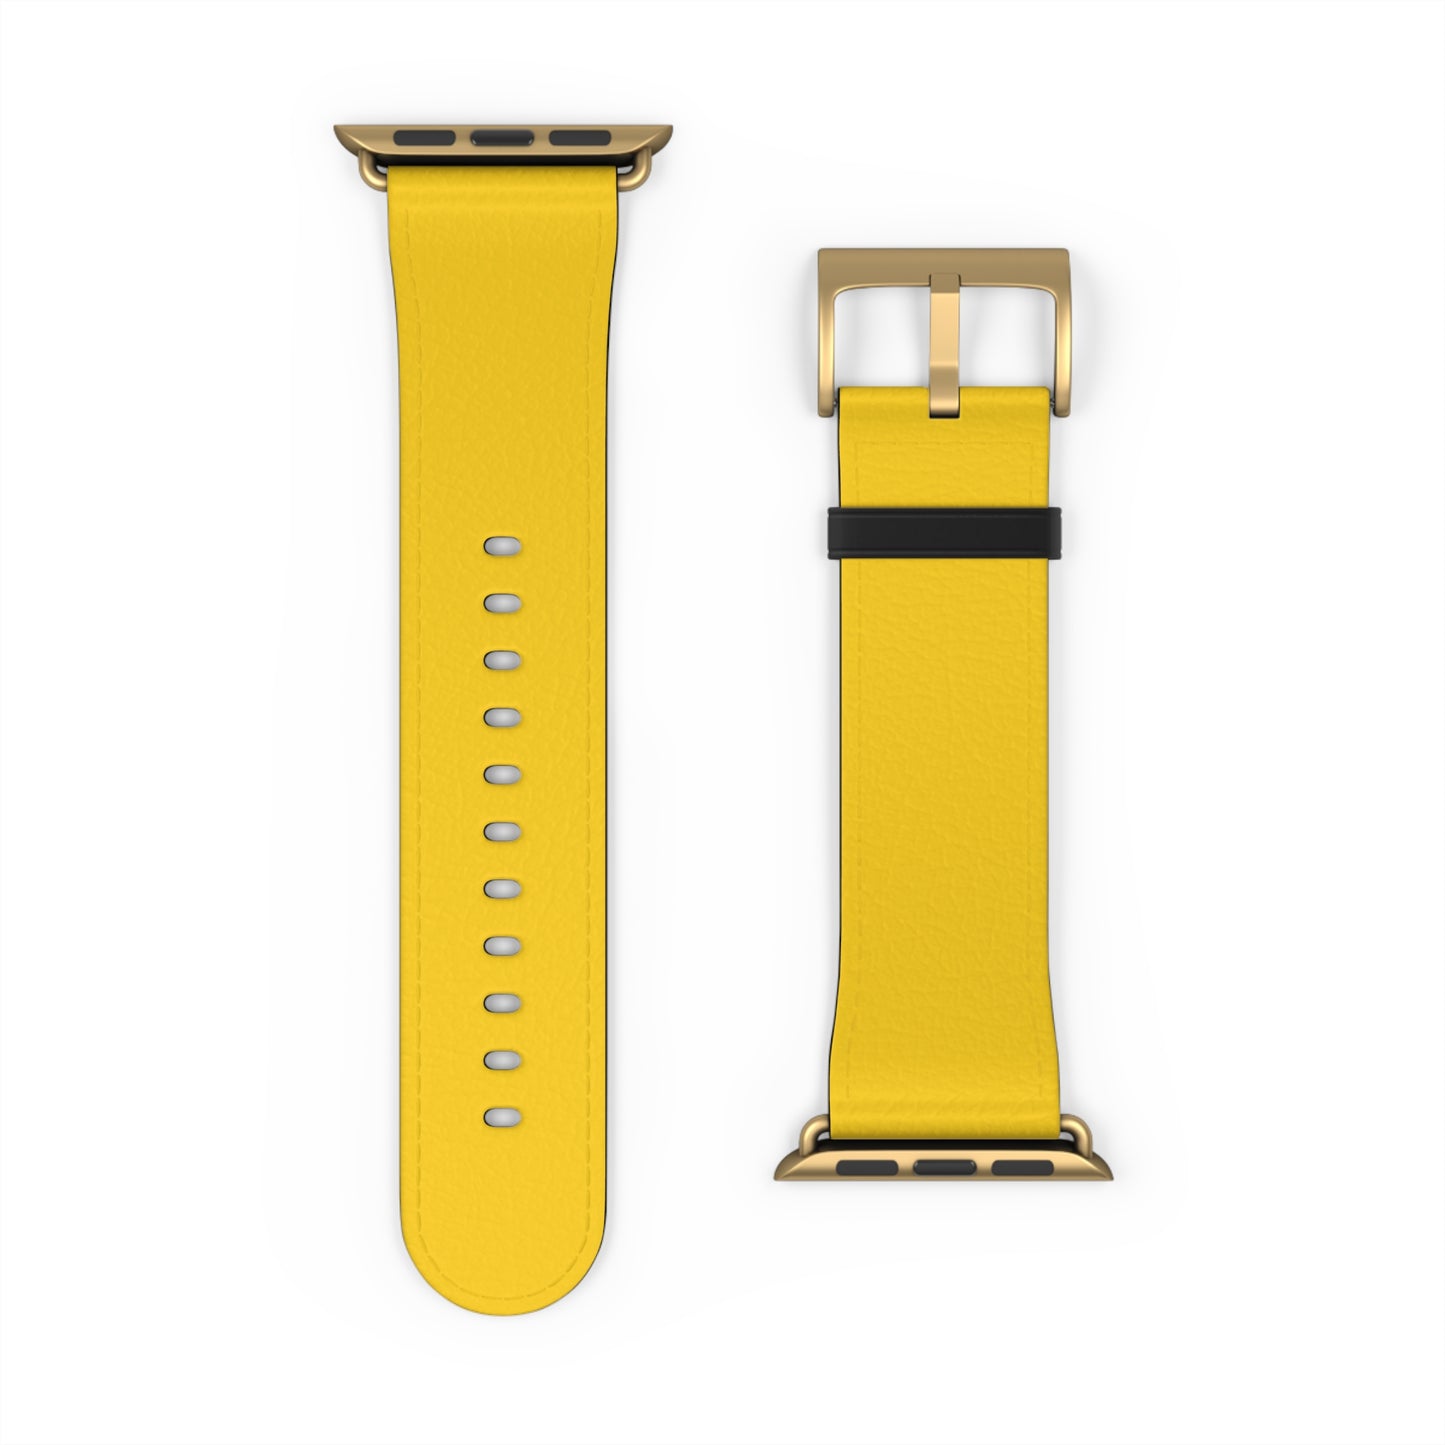 SOLID COLOR YELLOW APPLE® WATCH BAND- PANTONE® 109